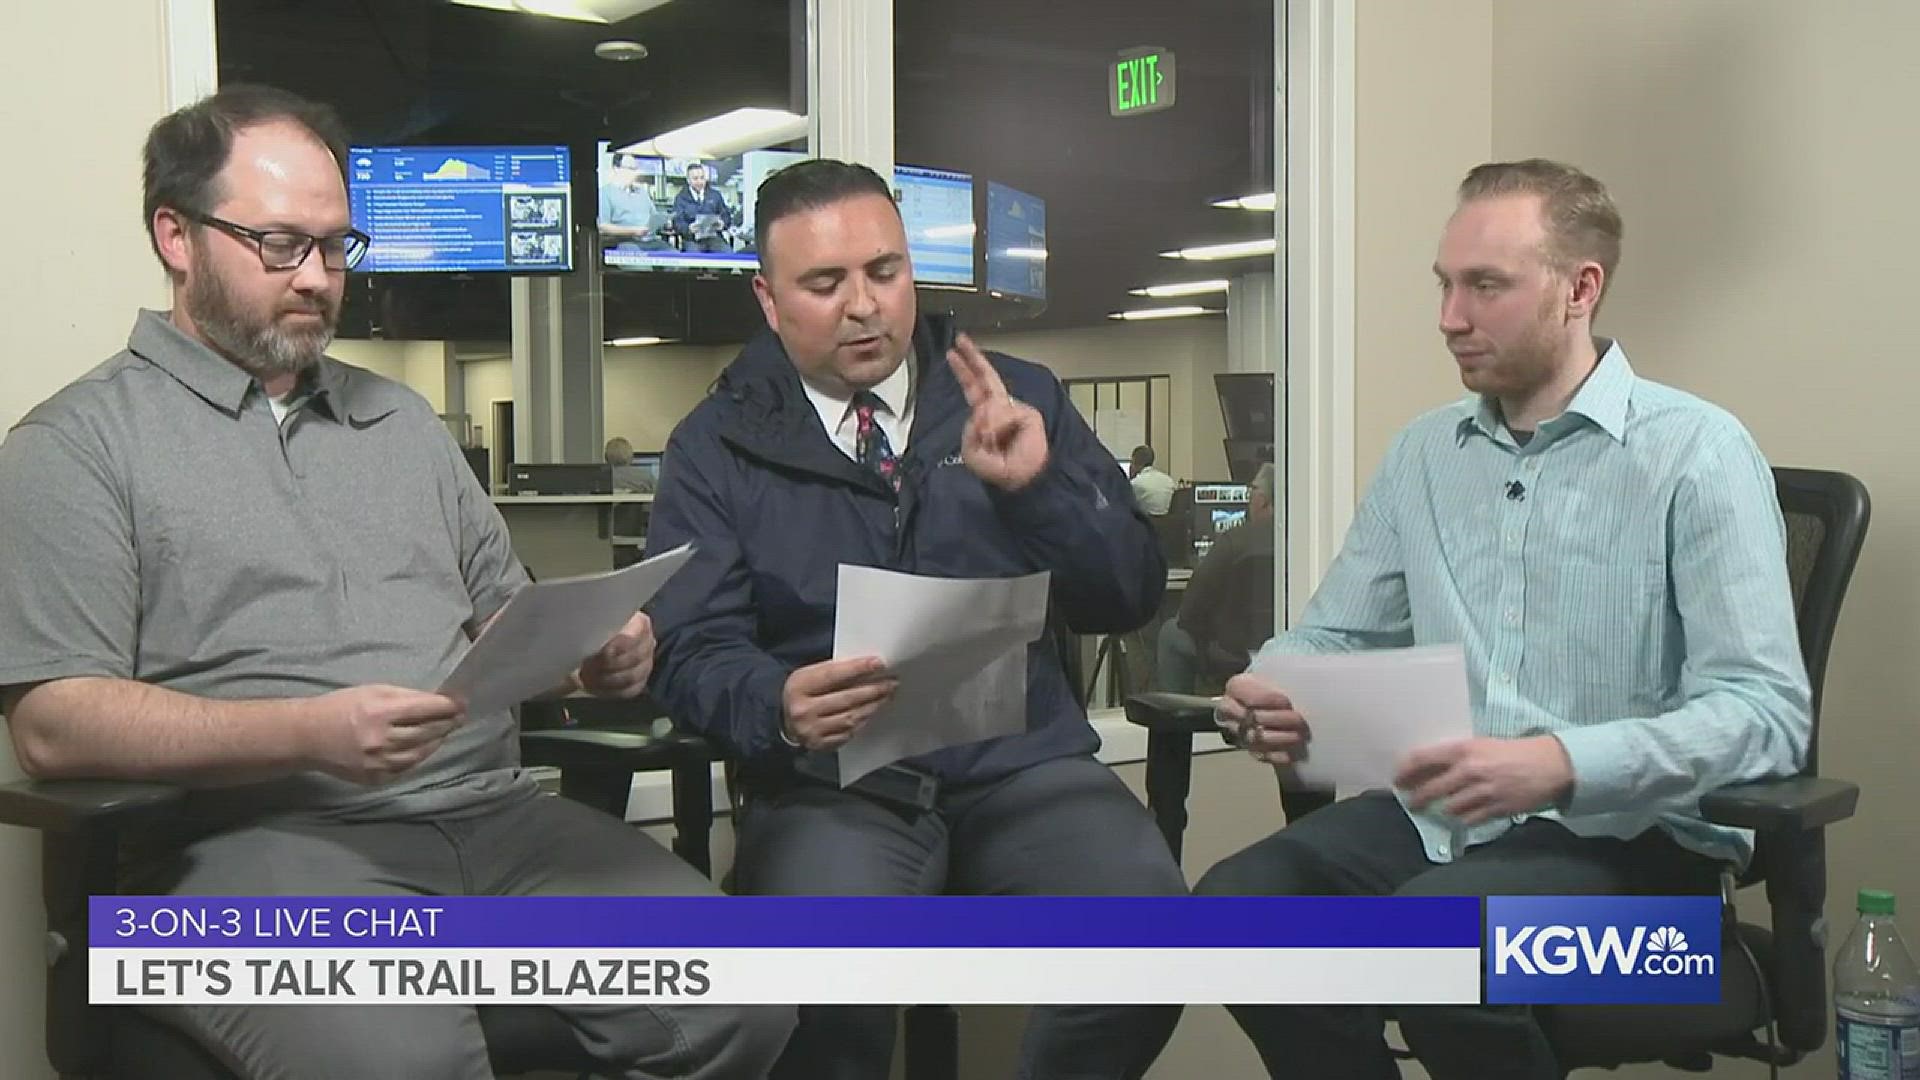 KGW's Jared Cowley, Orlando Sanchez and Nate Hanson talk about the Blazers' starting lineup and how it has performed since Evan Turner became the starter at small forward 13 games ago.